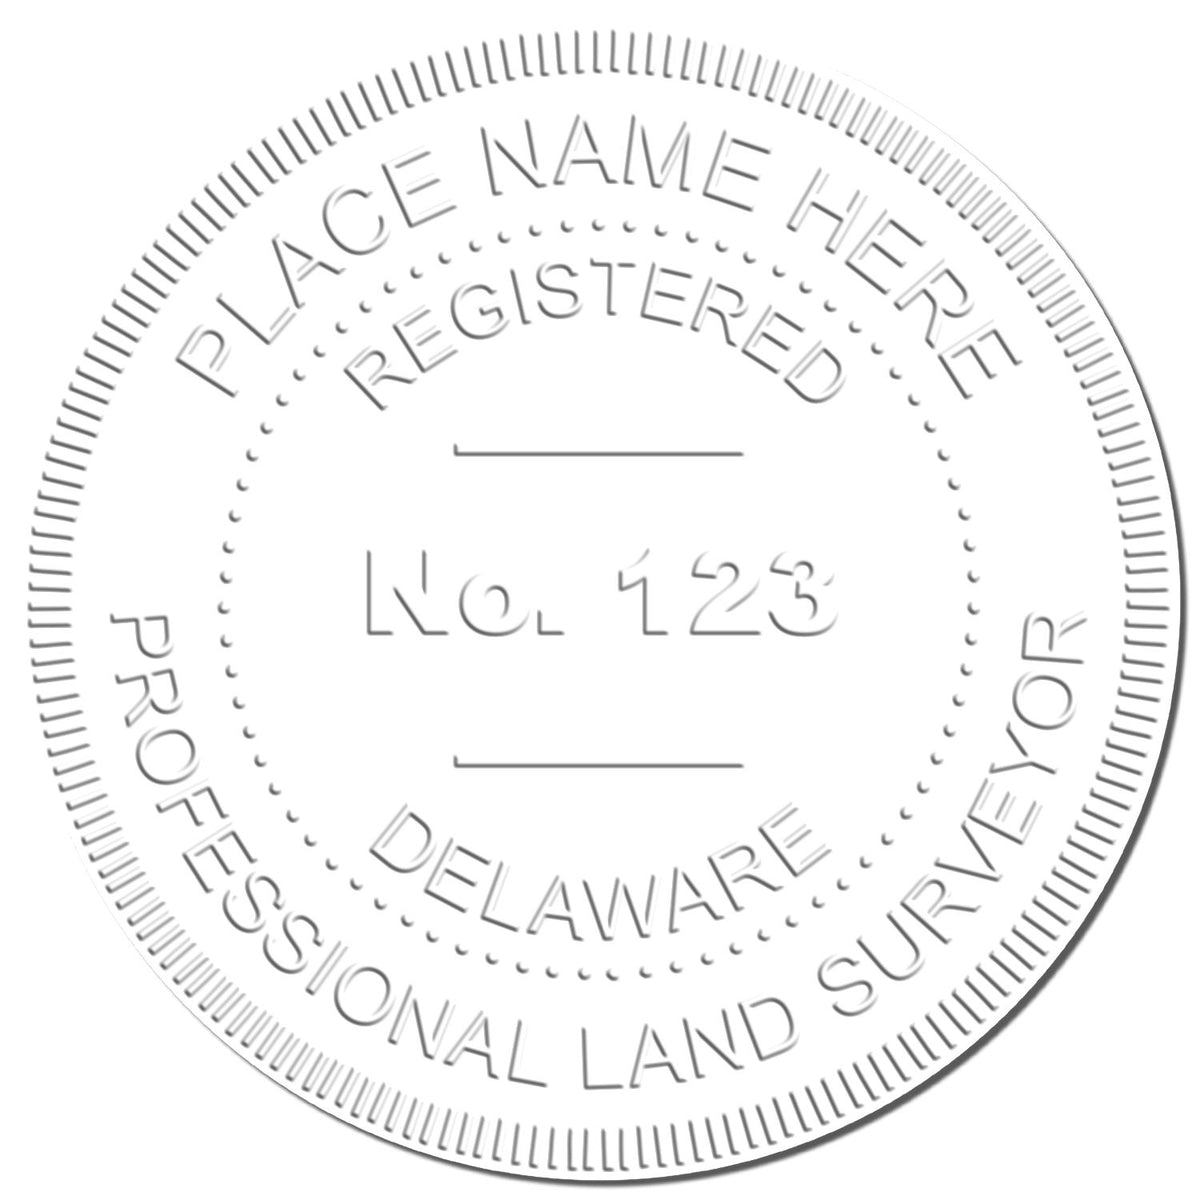 This paper is stamped with a sample imprint of the Gift Delaware Land Surveyor Seal, signifying its quality and reliability.